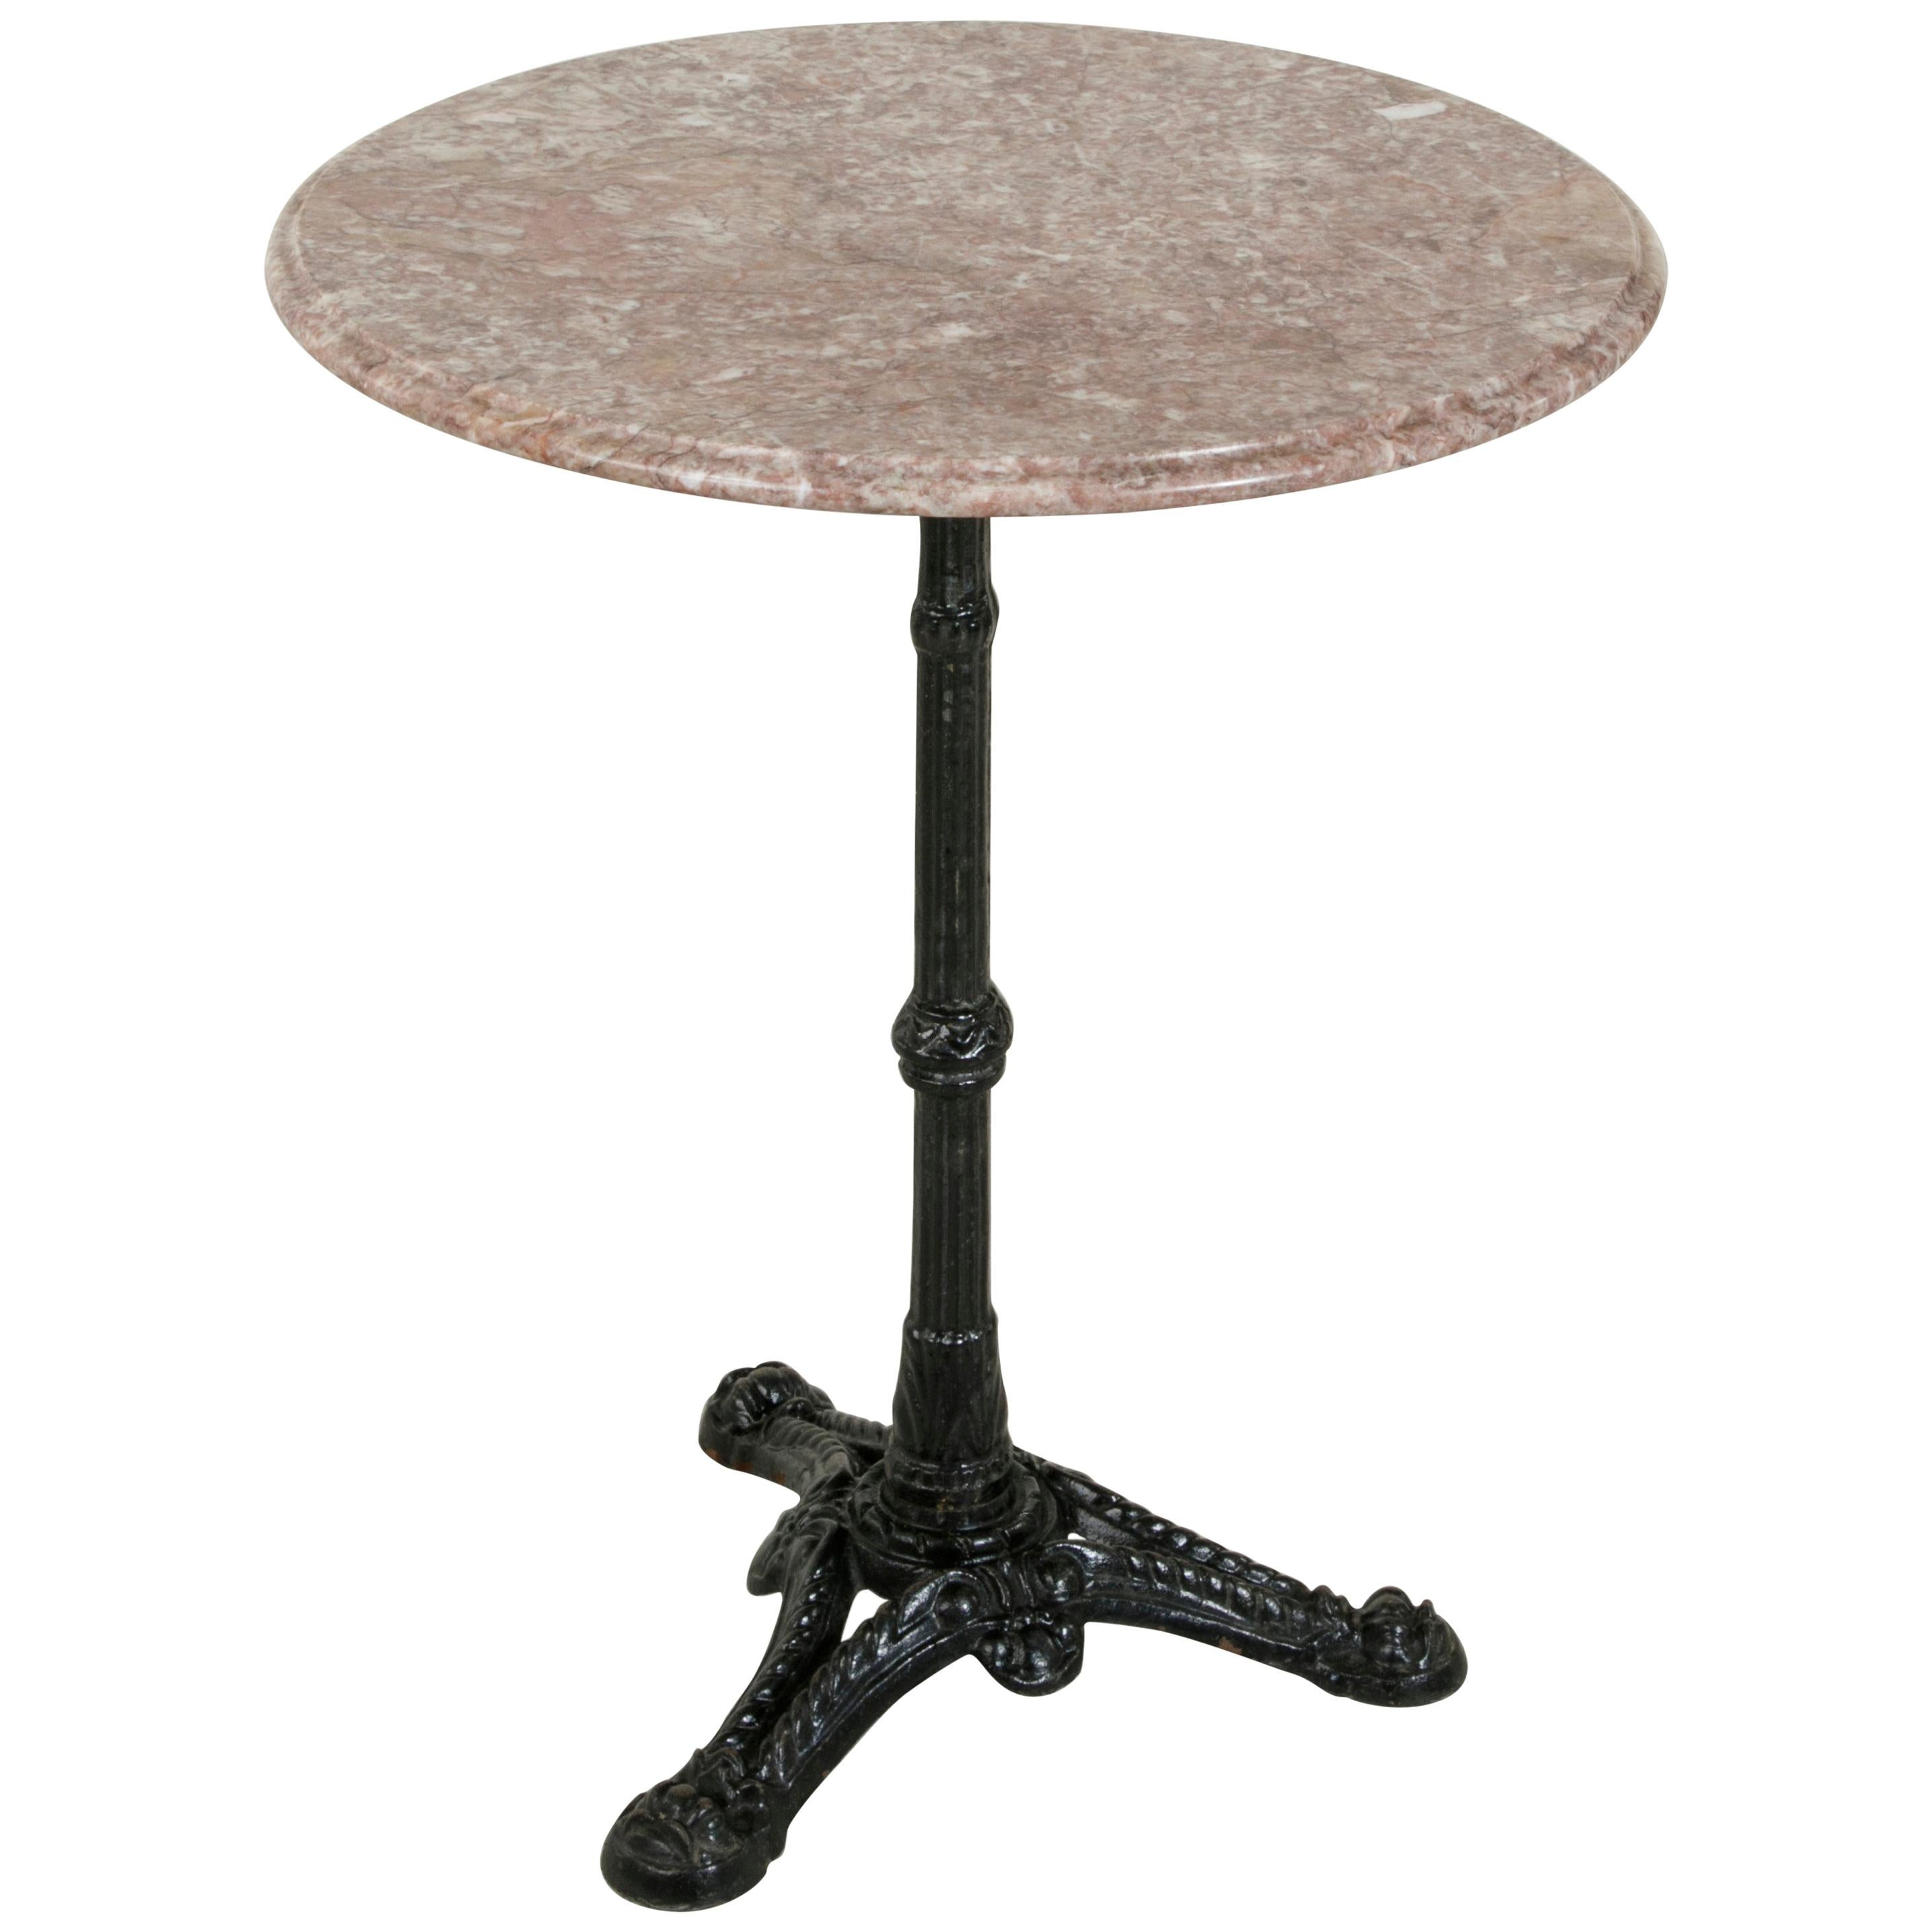 French Cast Iron Outdoor Bistro or Cafe Table with Marble Top, circa 1900